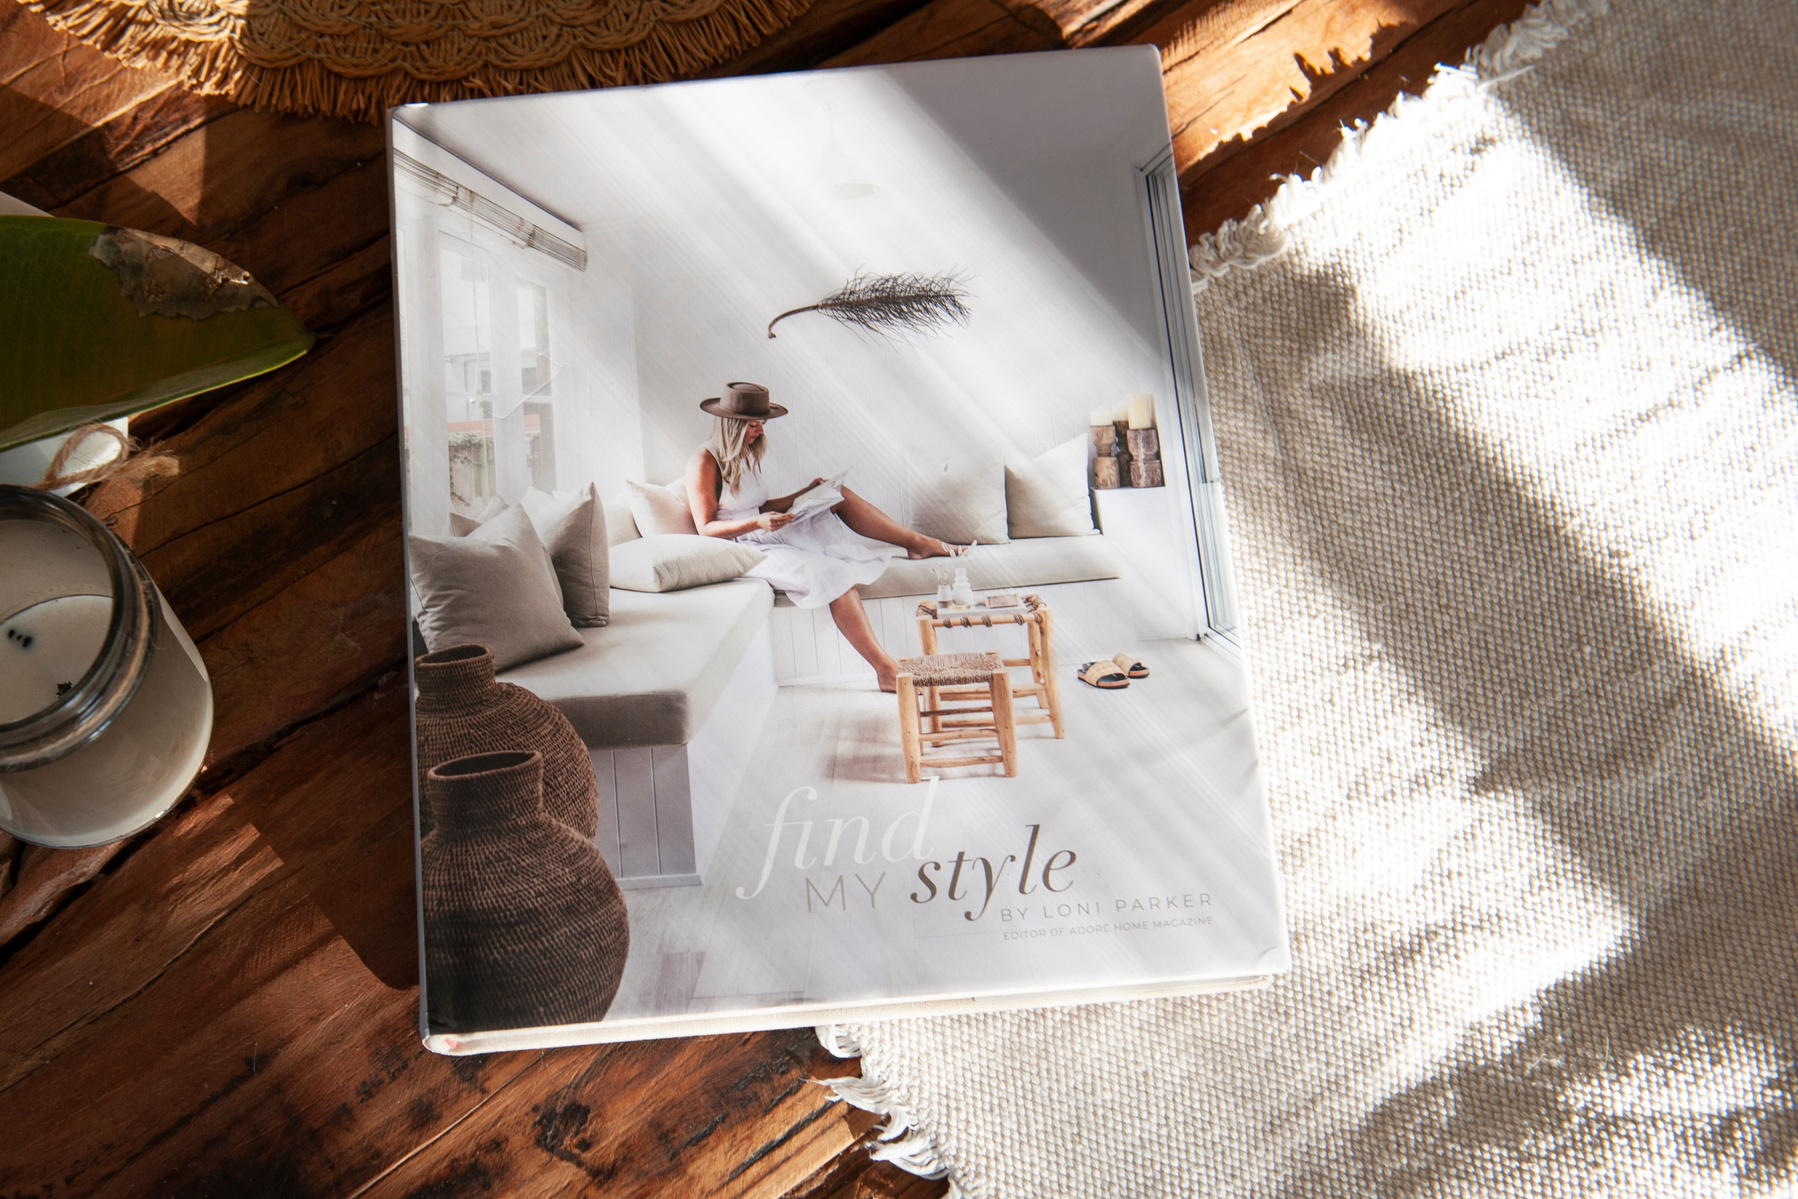 Cover of interior design book, Find My Style